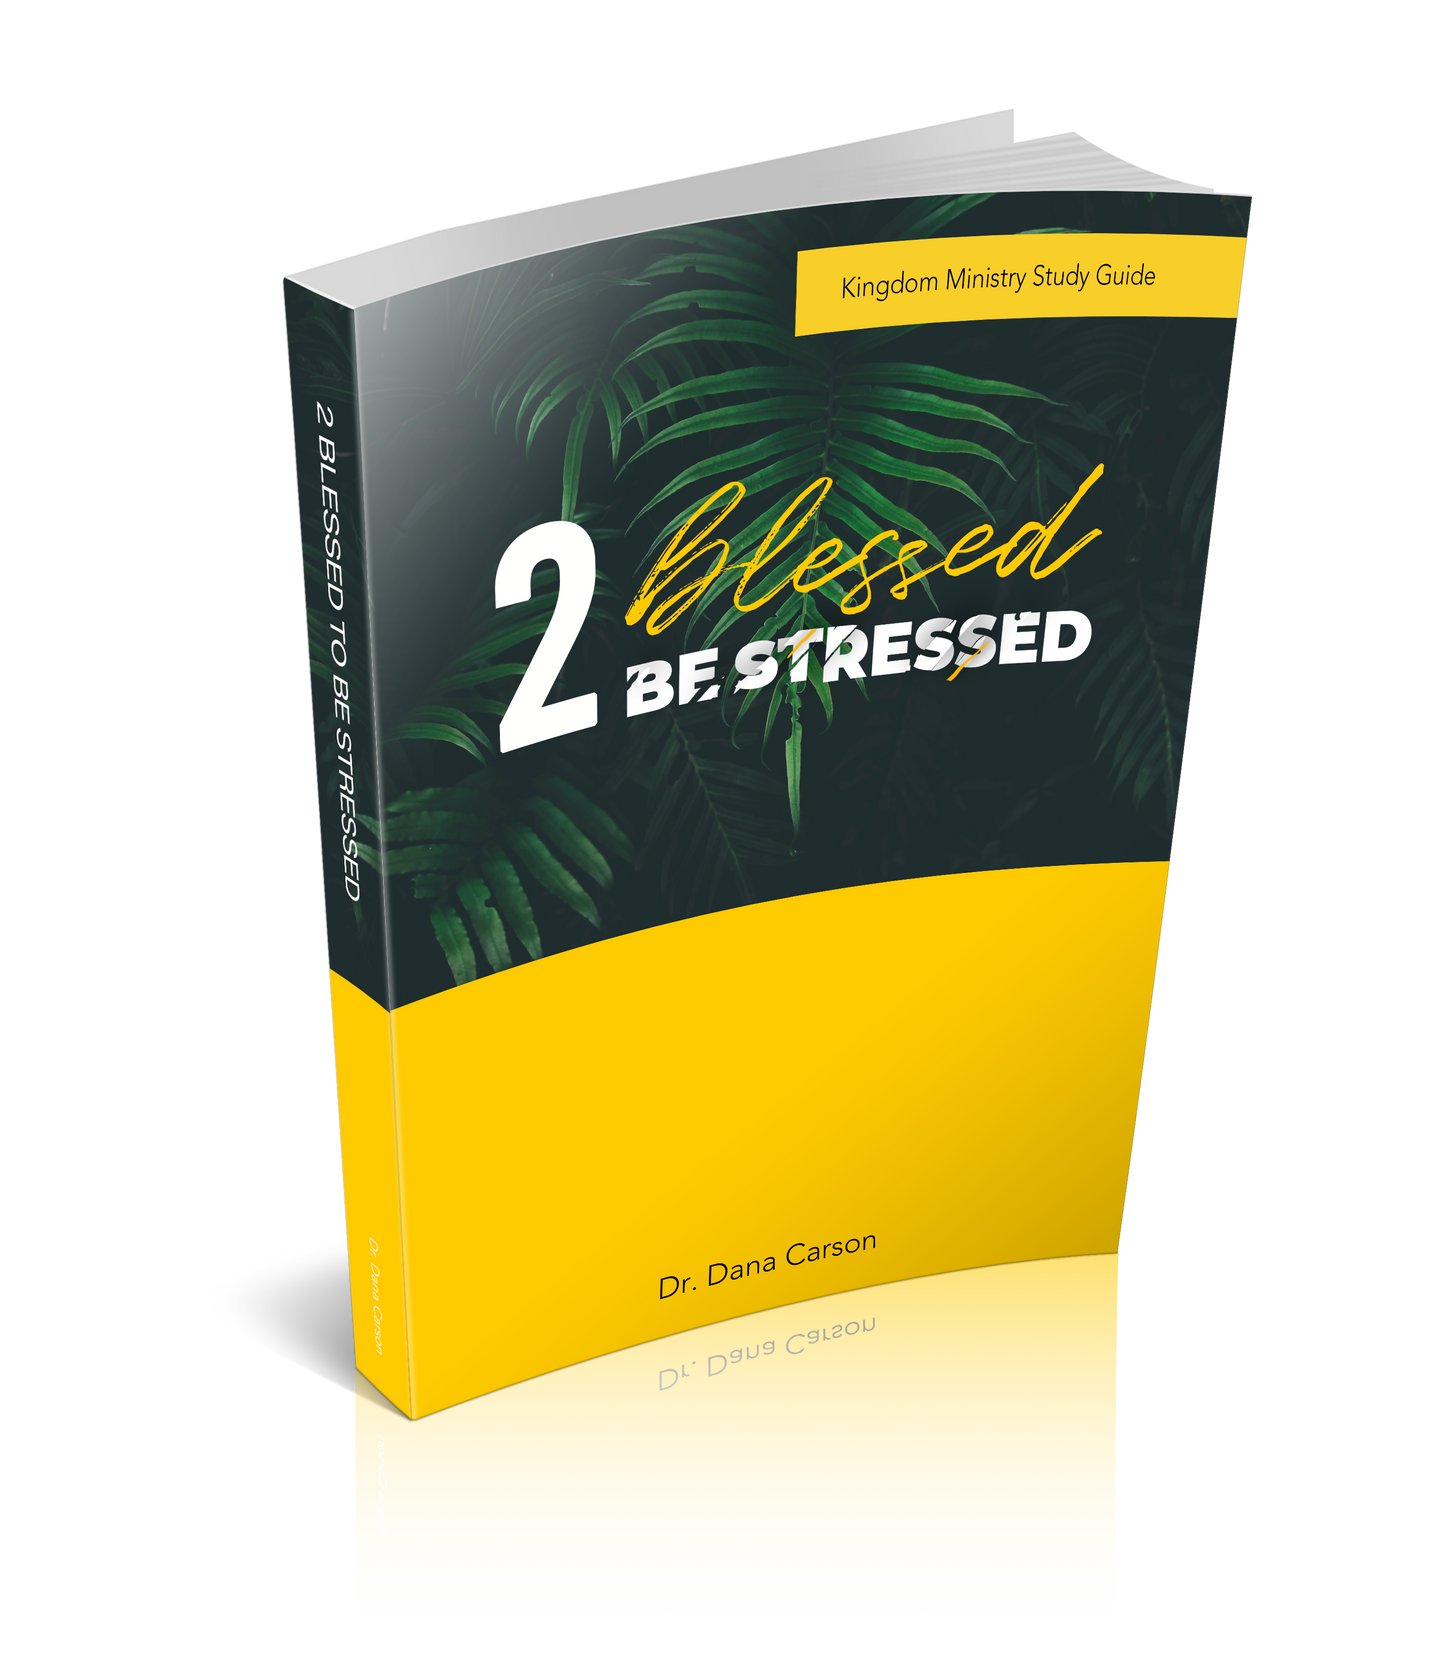 2 Blessed 2 Be Stressed Kingdom Bible Study Guide